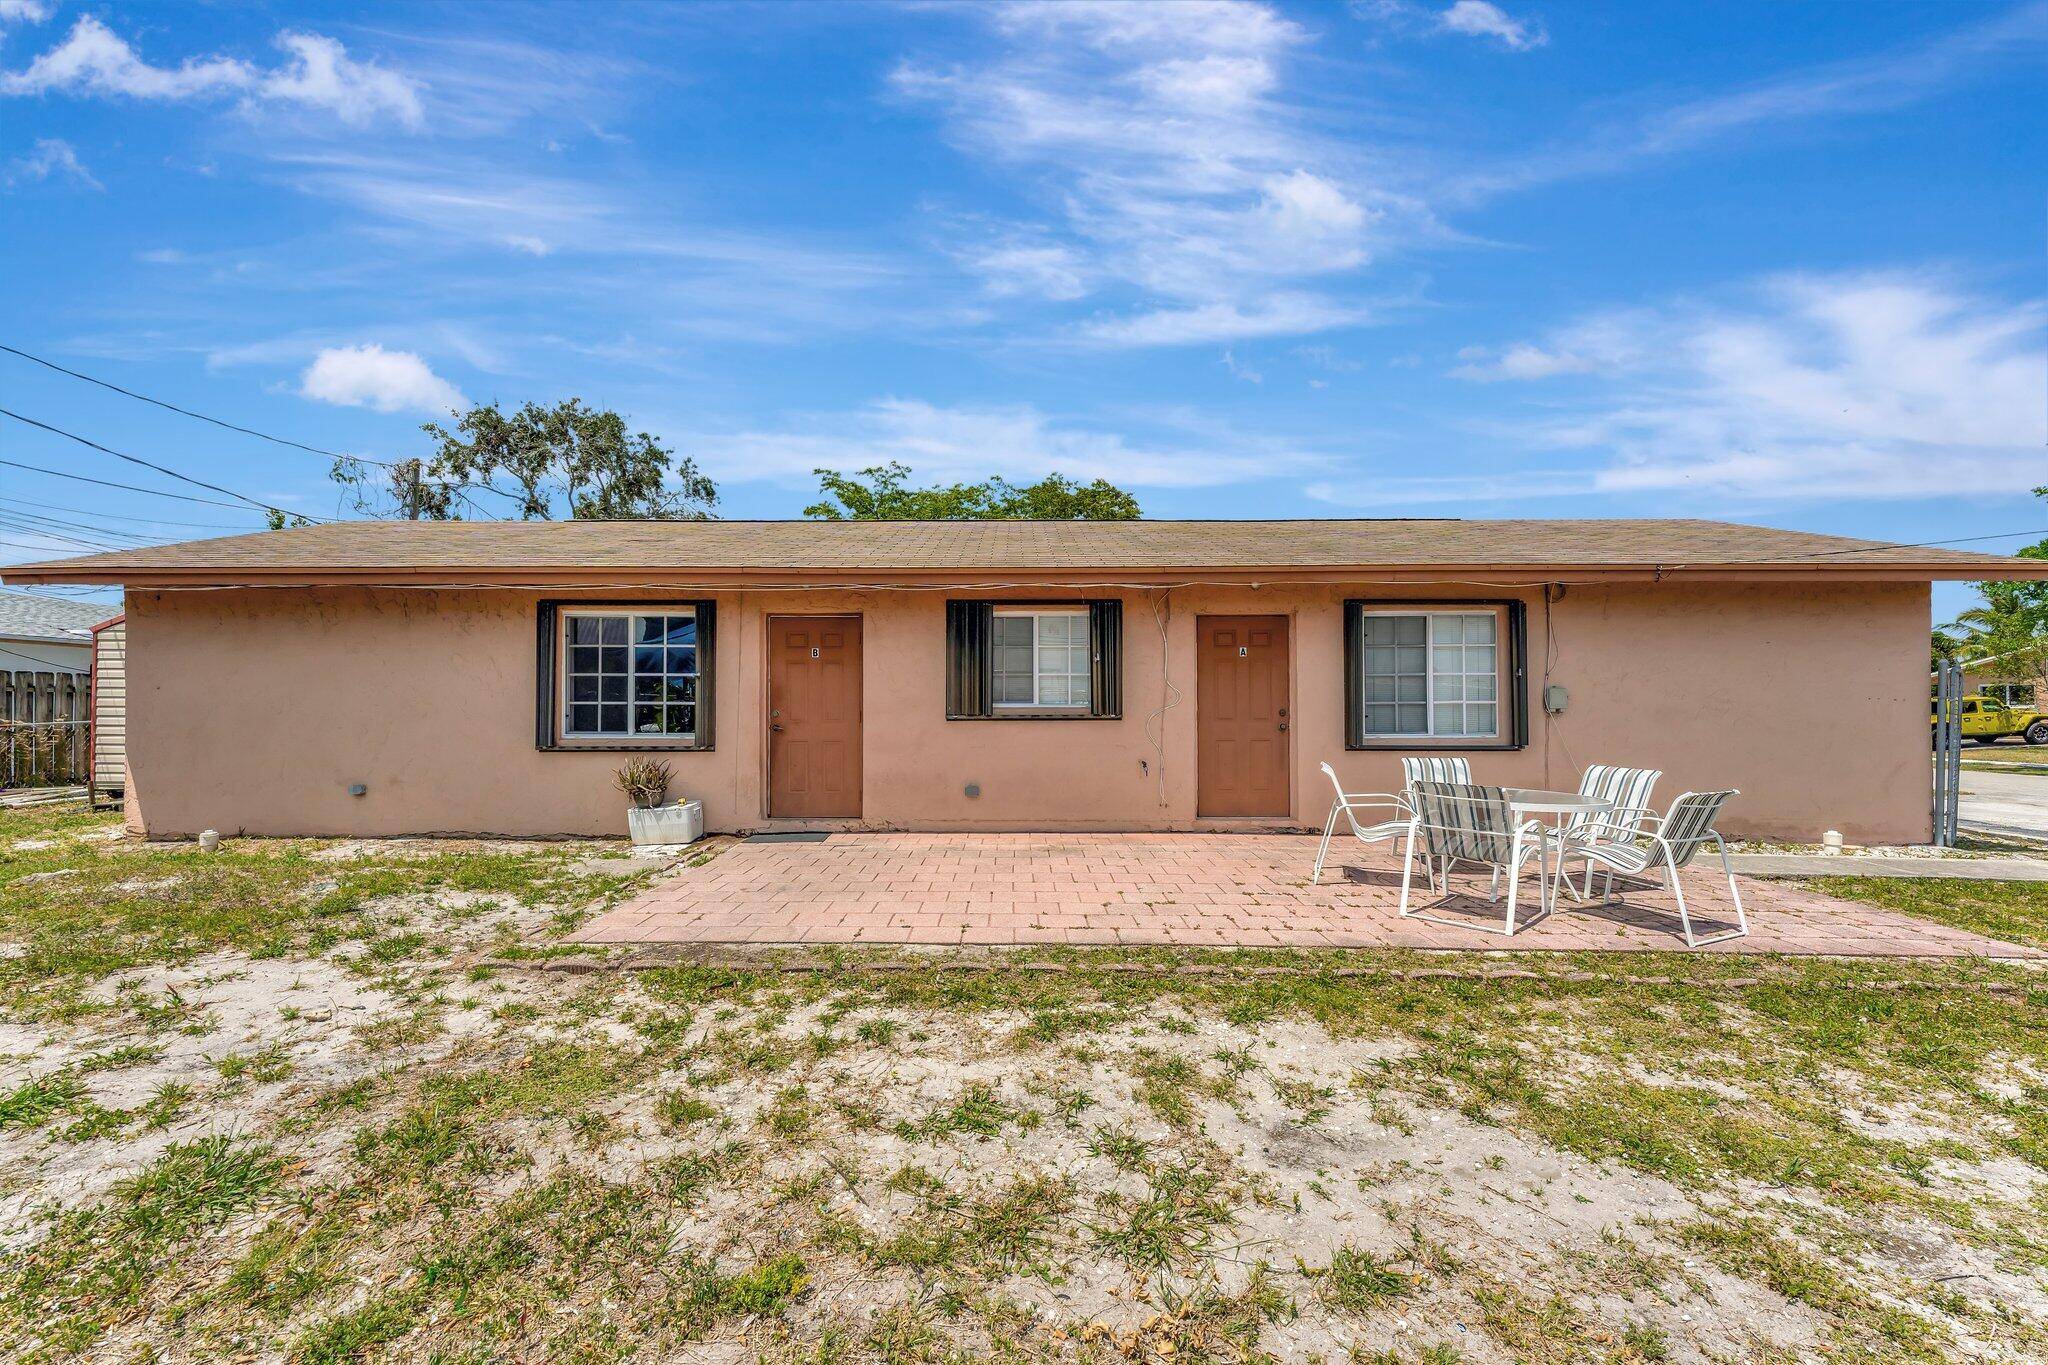 Charming duplex with a fantastic location just 10 minutes from the beach in Pompano Beach.